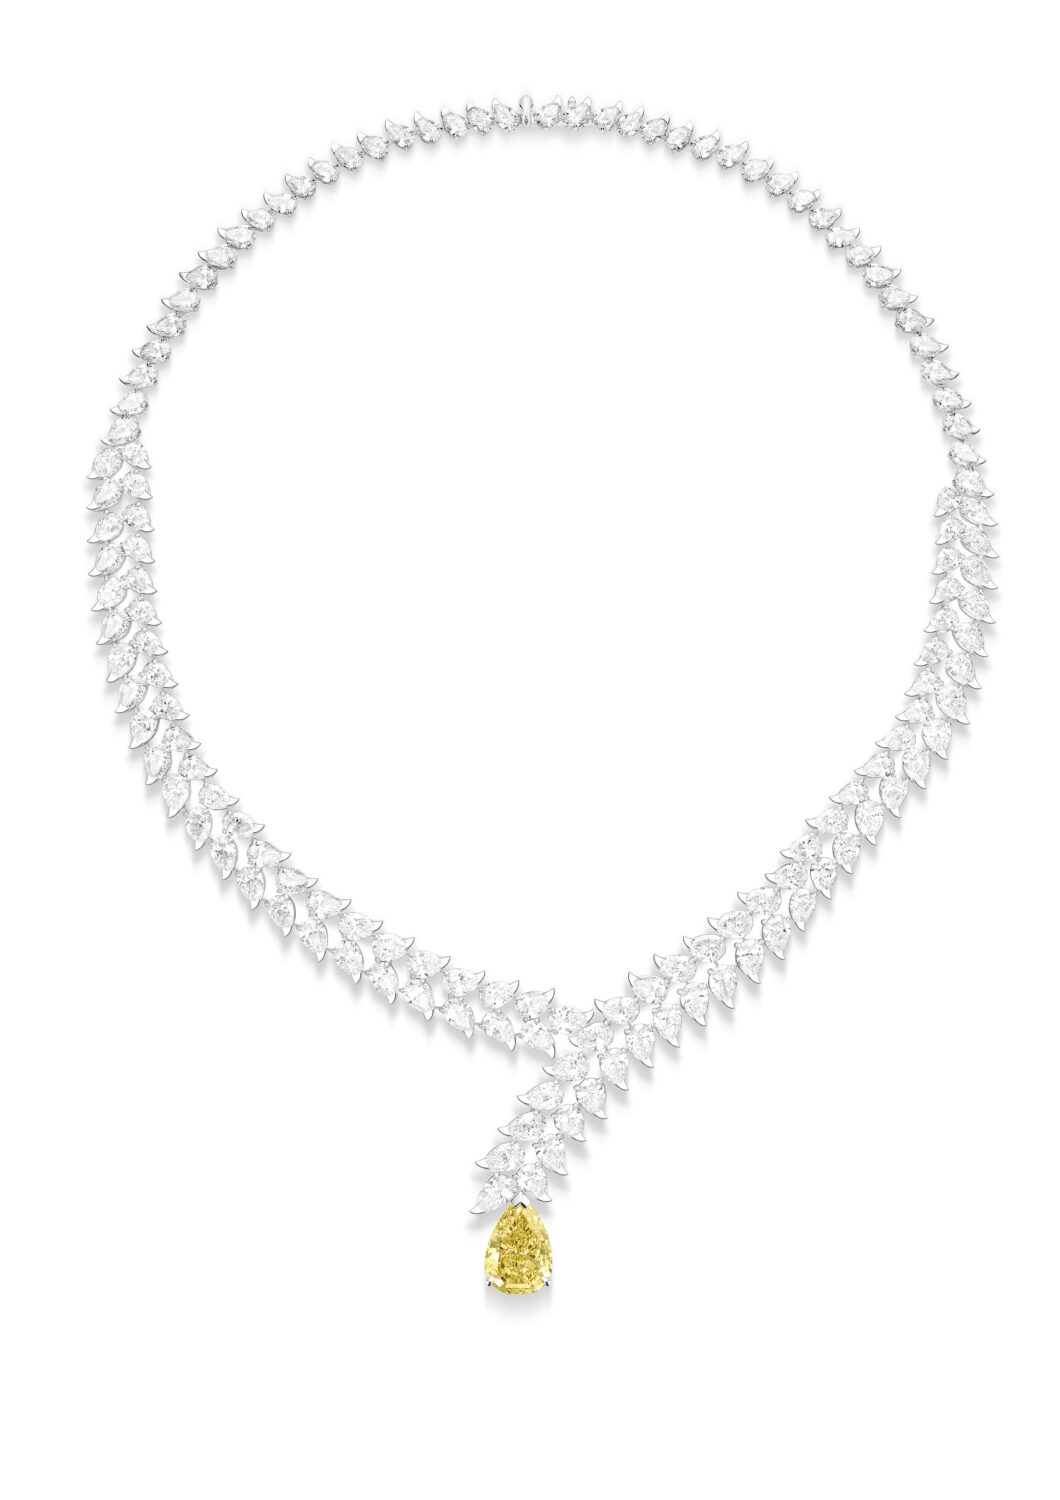 Lot 37: Ladies Piaget High Jewelry Necklace Set